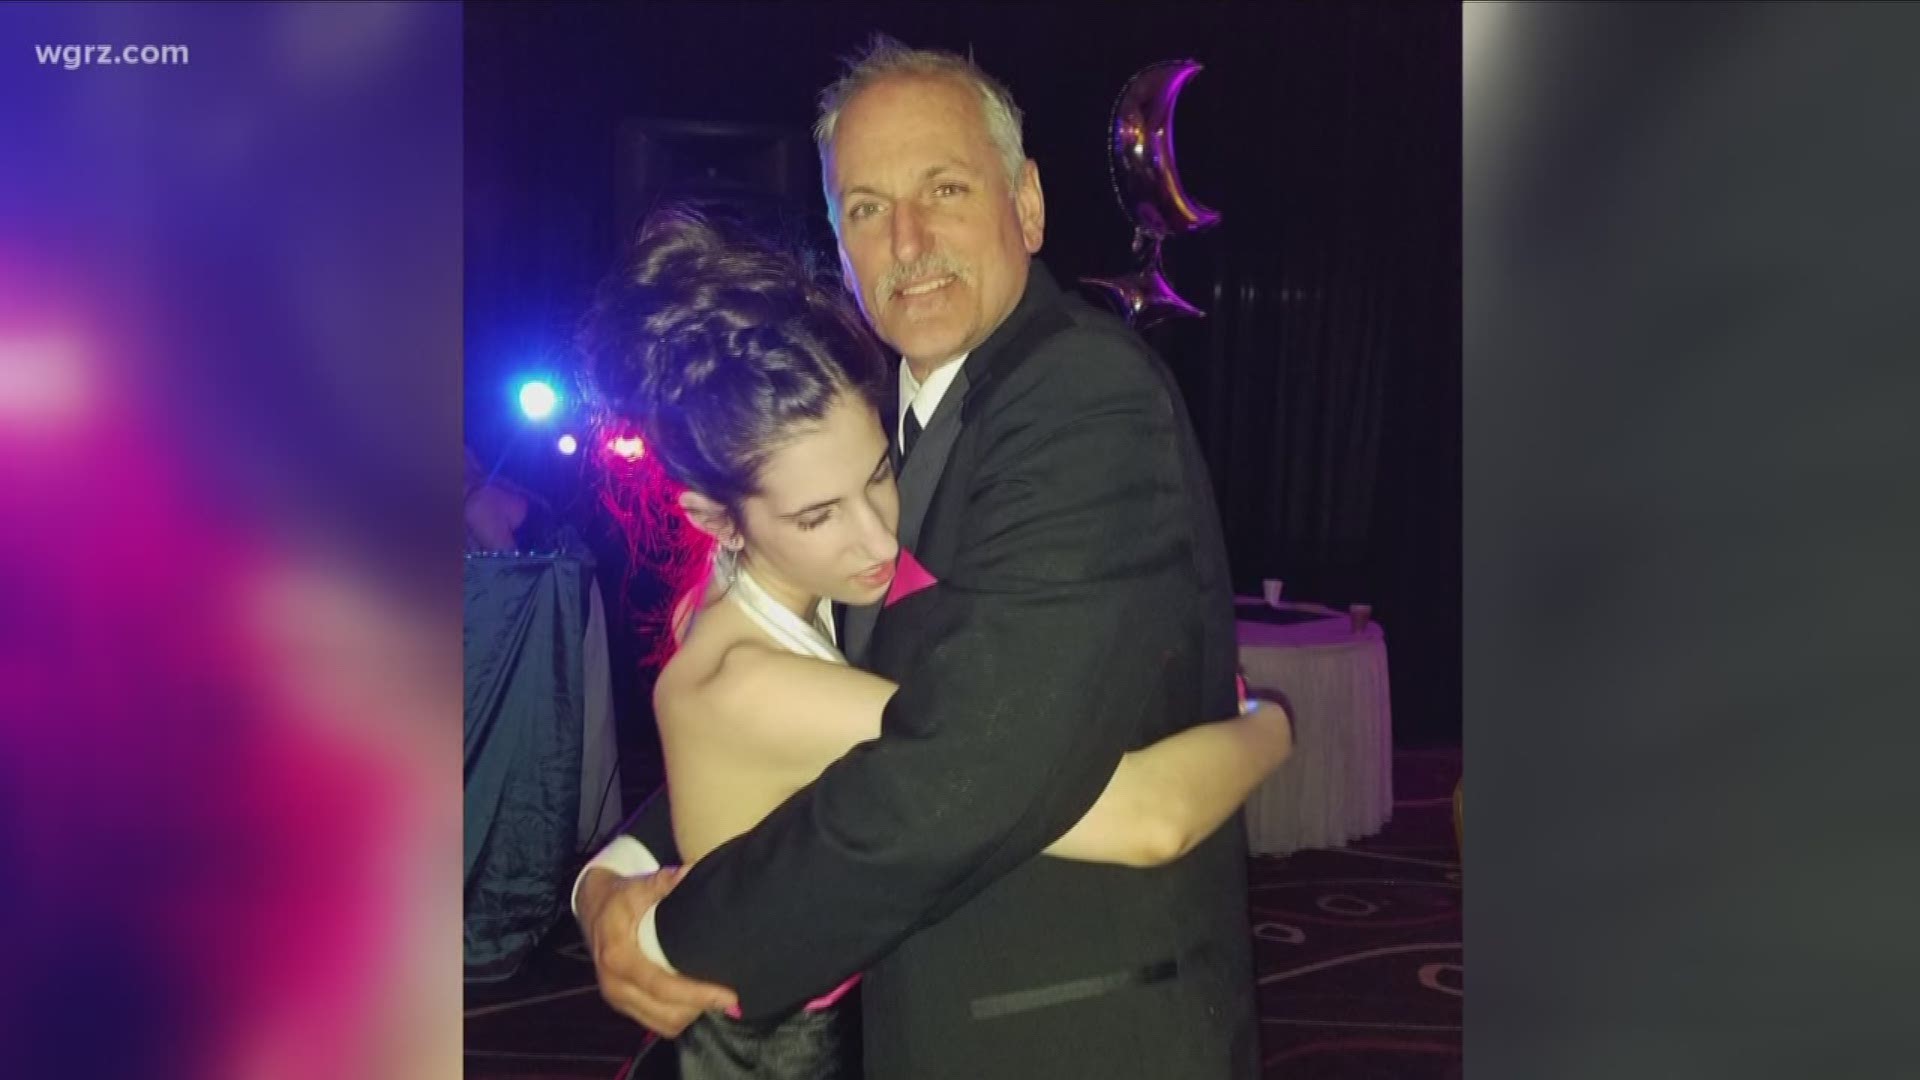 His daughter, Tori, had the time of her life with her dad as her date.